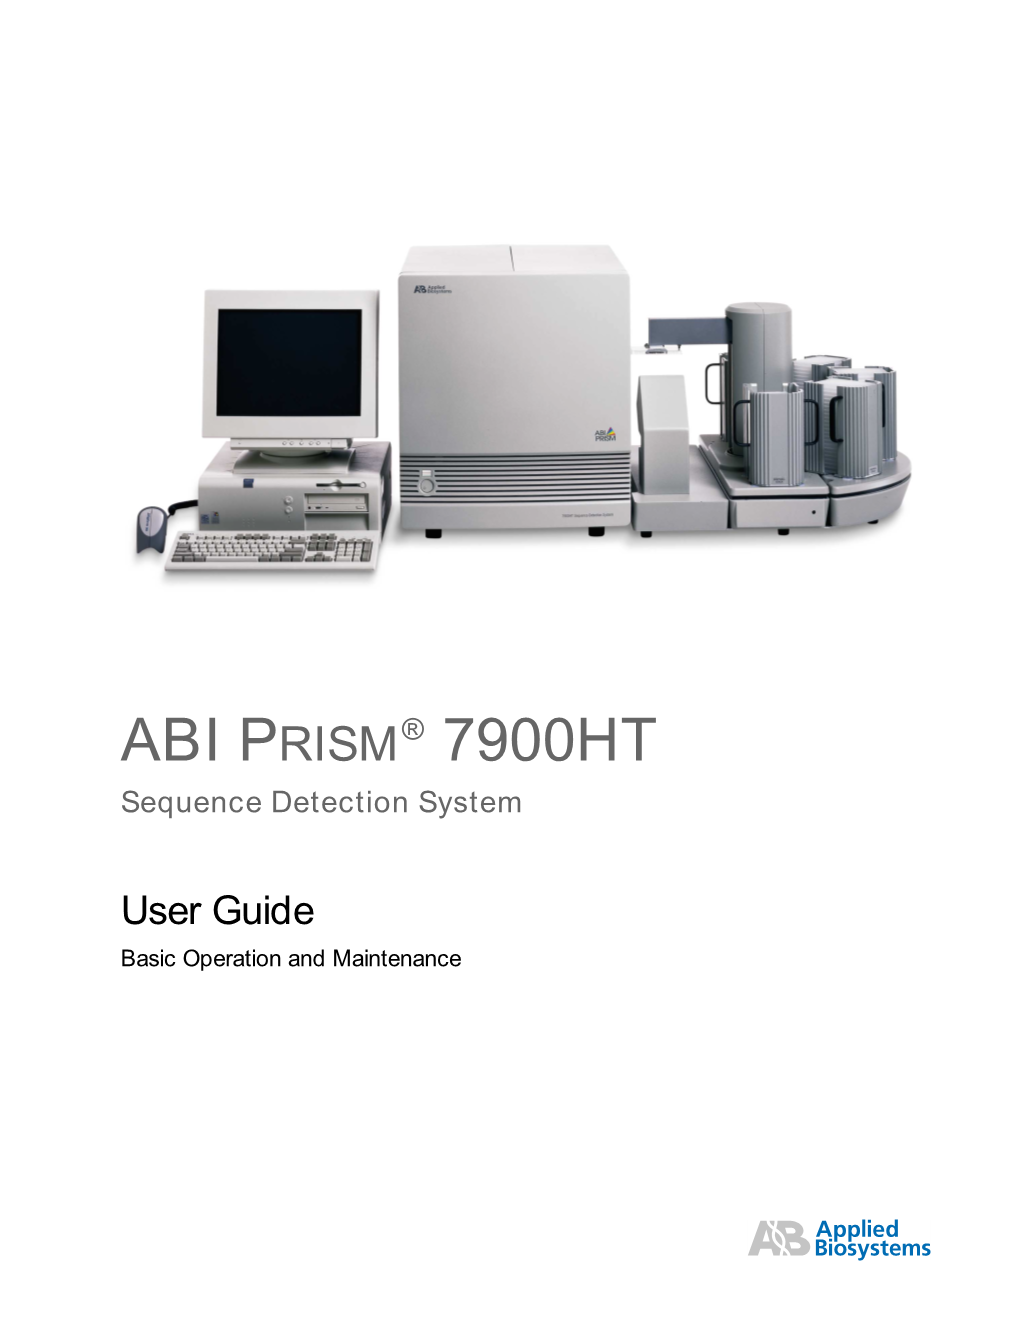 ABI Prism® 7900HT Sequence Detection System User Guide